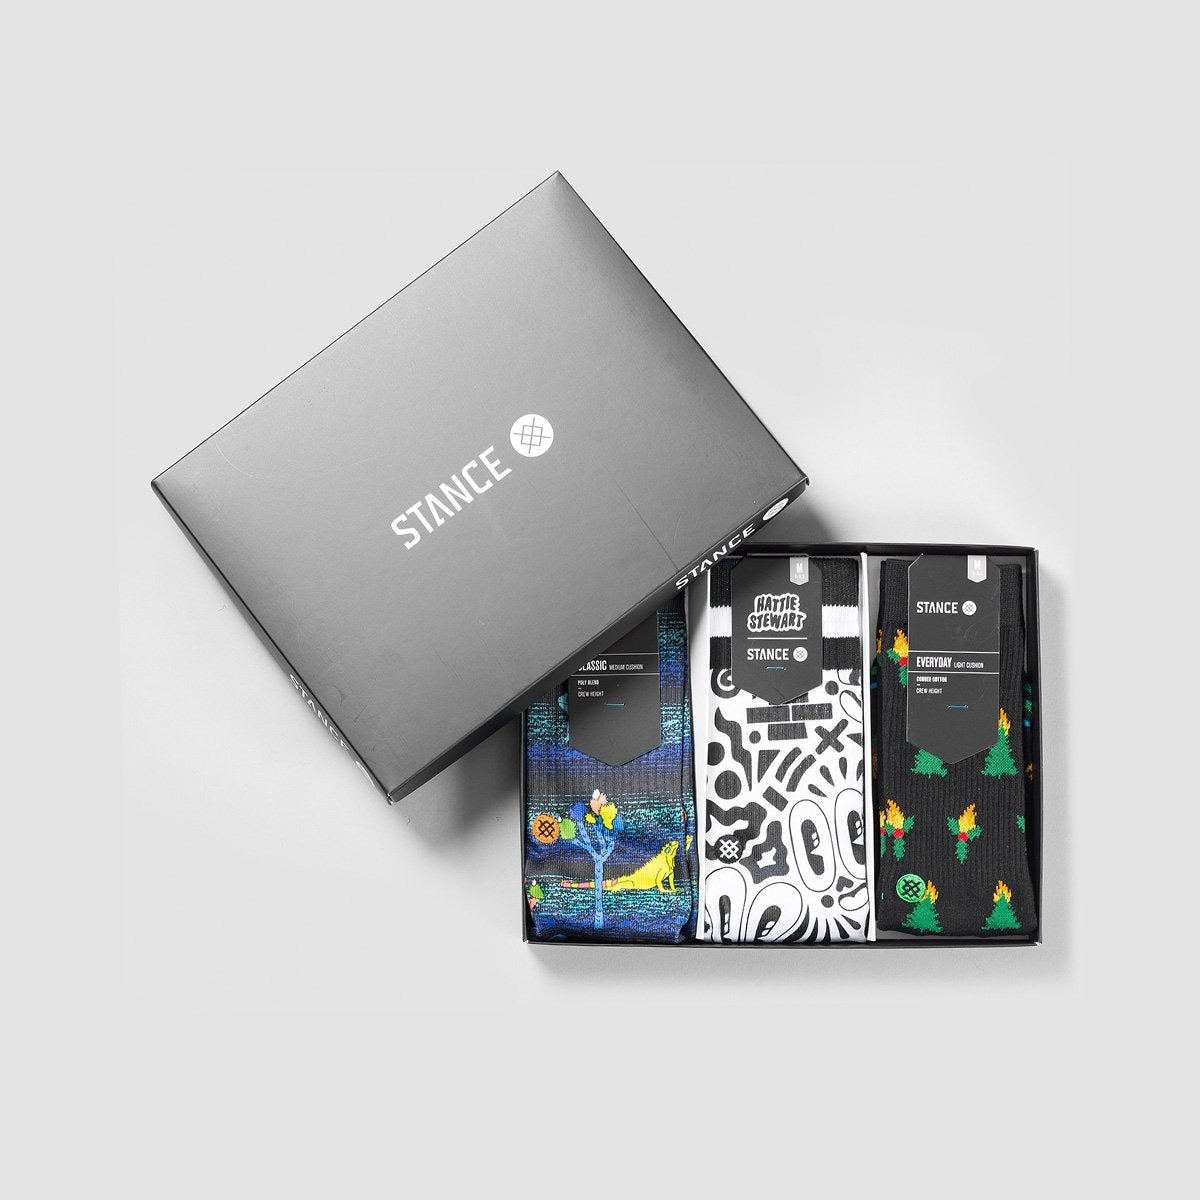 Stance Foundation 1 Socks 3 Pack Box Set Various - Accessories